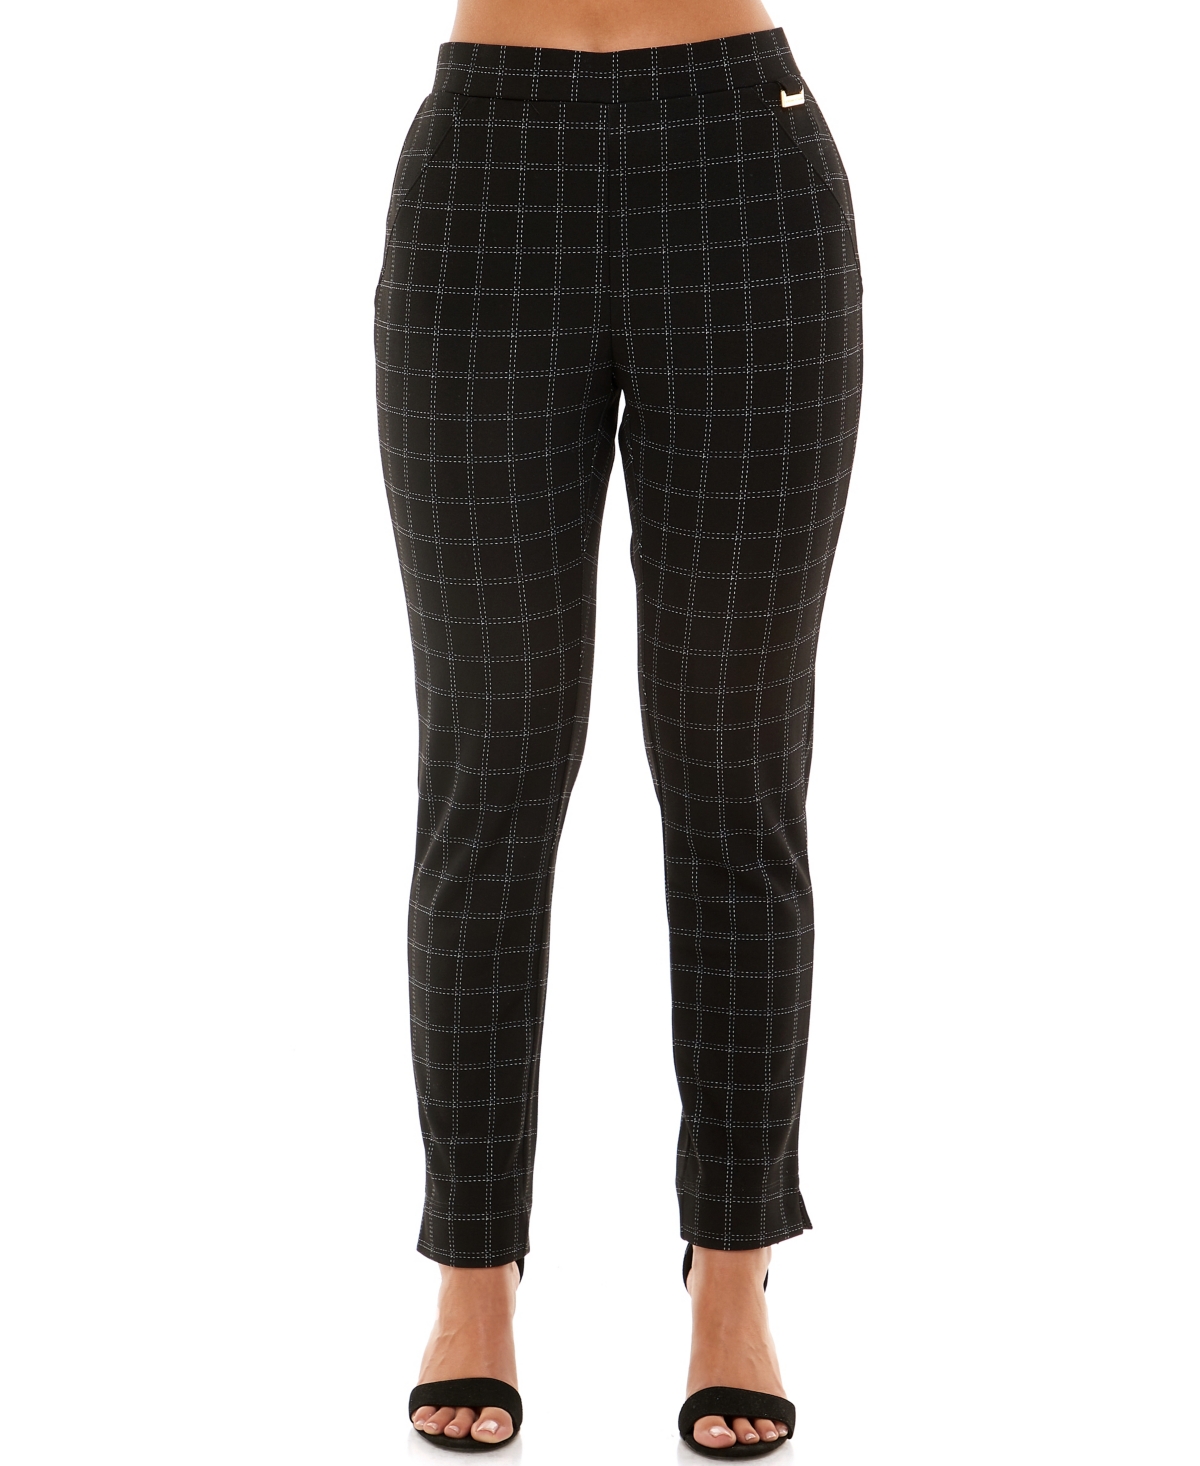 Women's Pull On with Side Slits Pants - Piper Plaid